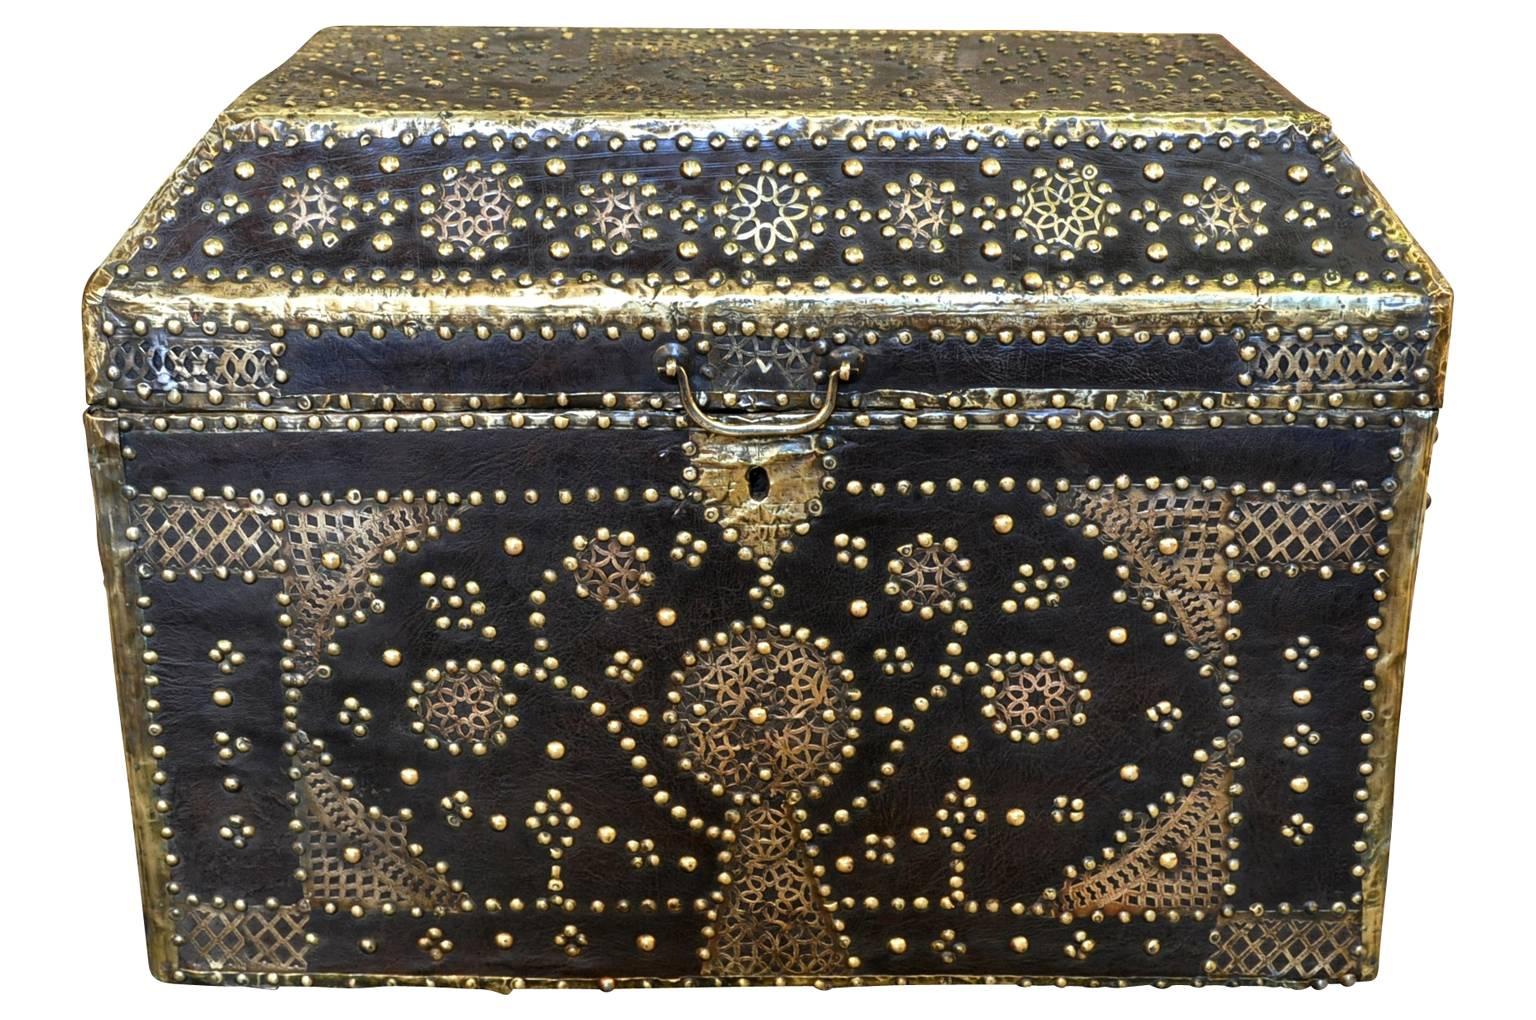 An exquisite 18th century marriage trunk or Malle from the Provence region of France. Beautifully constructed in wood clad with leather and bronze nailheads and hardware. An exceptional piece to add charm to any living area.